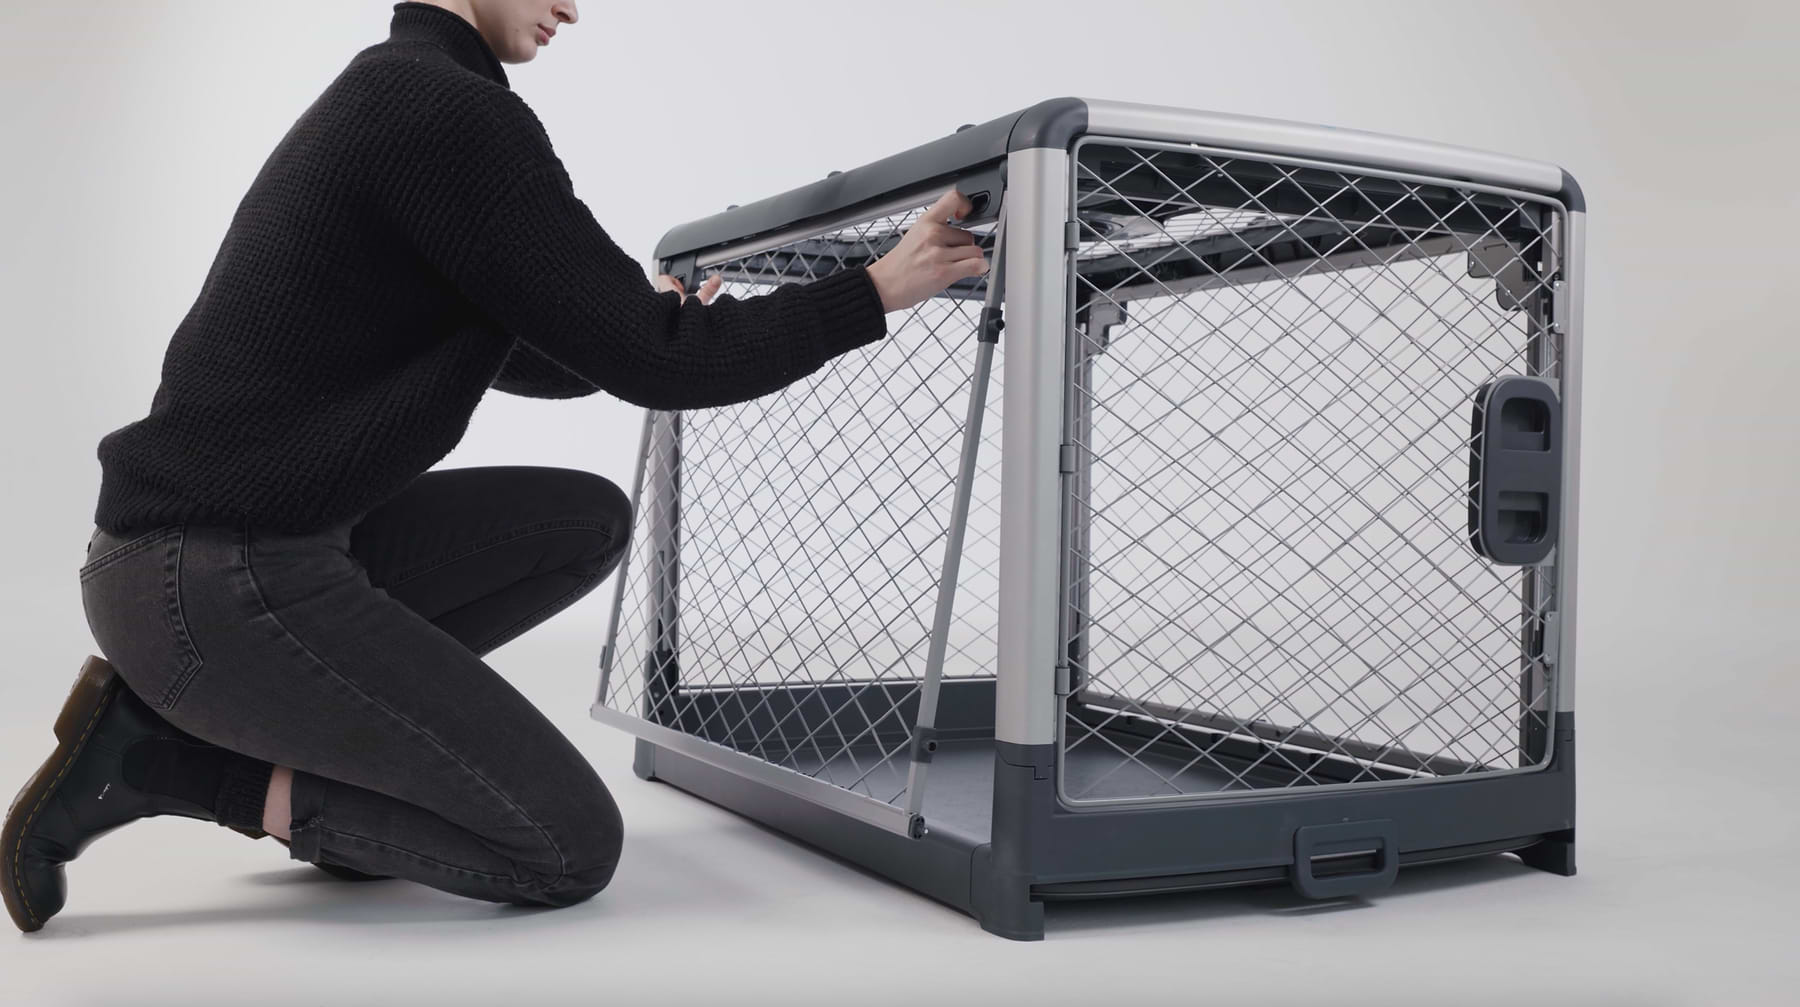 A model wearing a black sweater and black pants showing how to disassemble a crate.